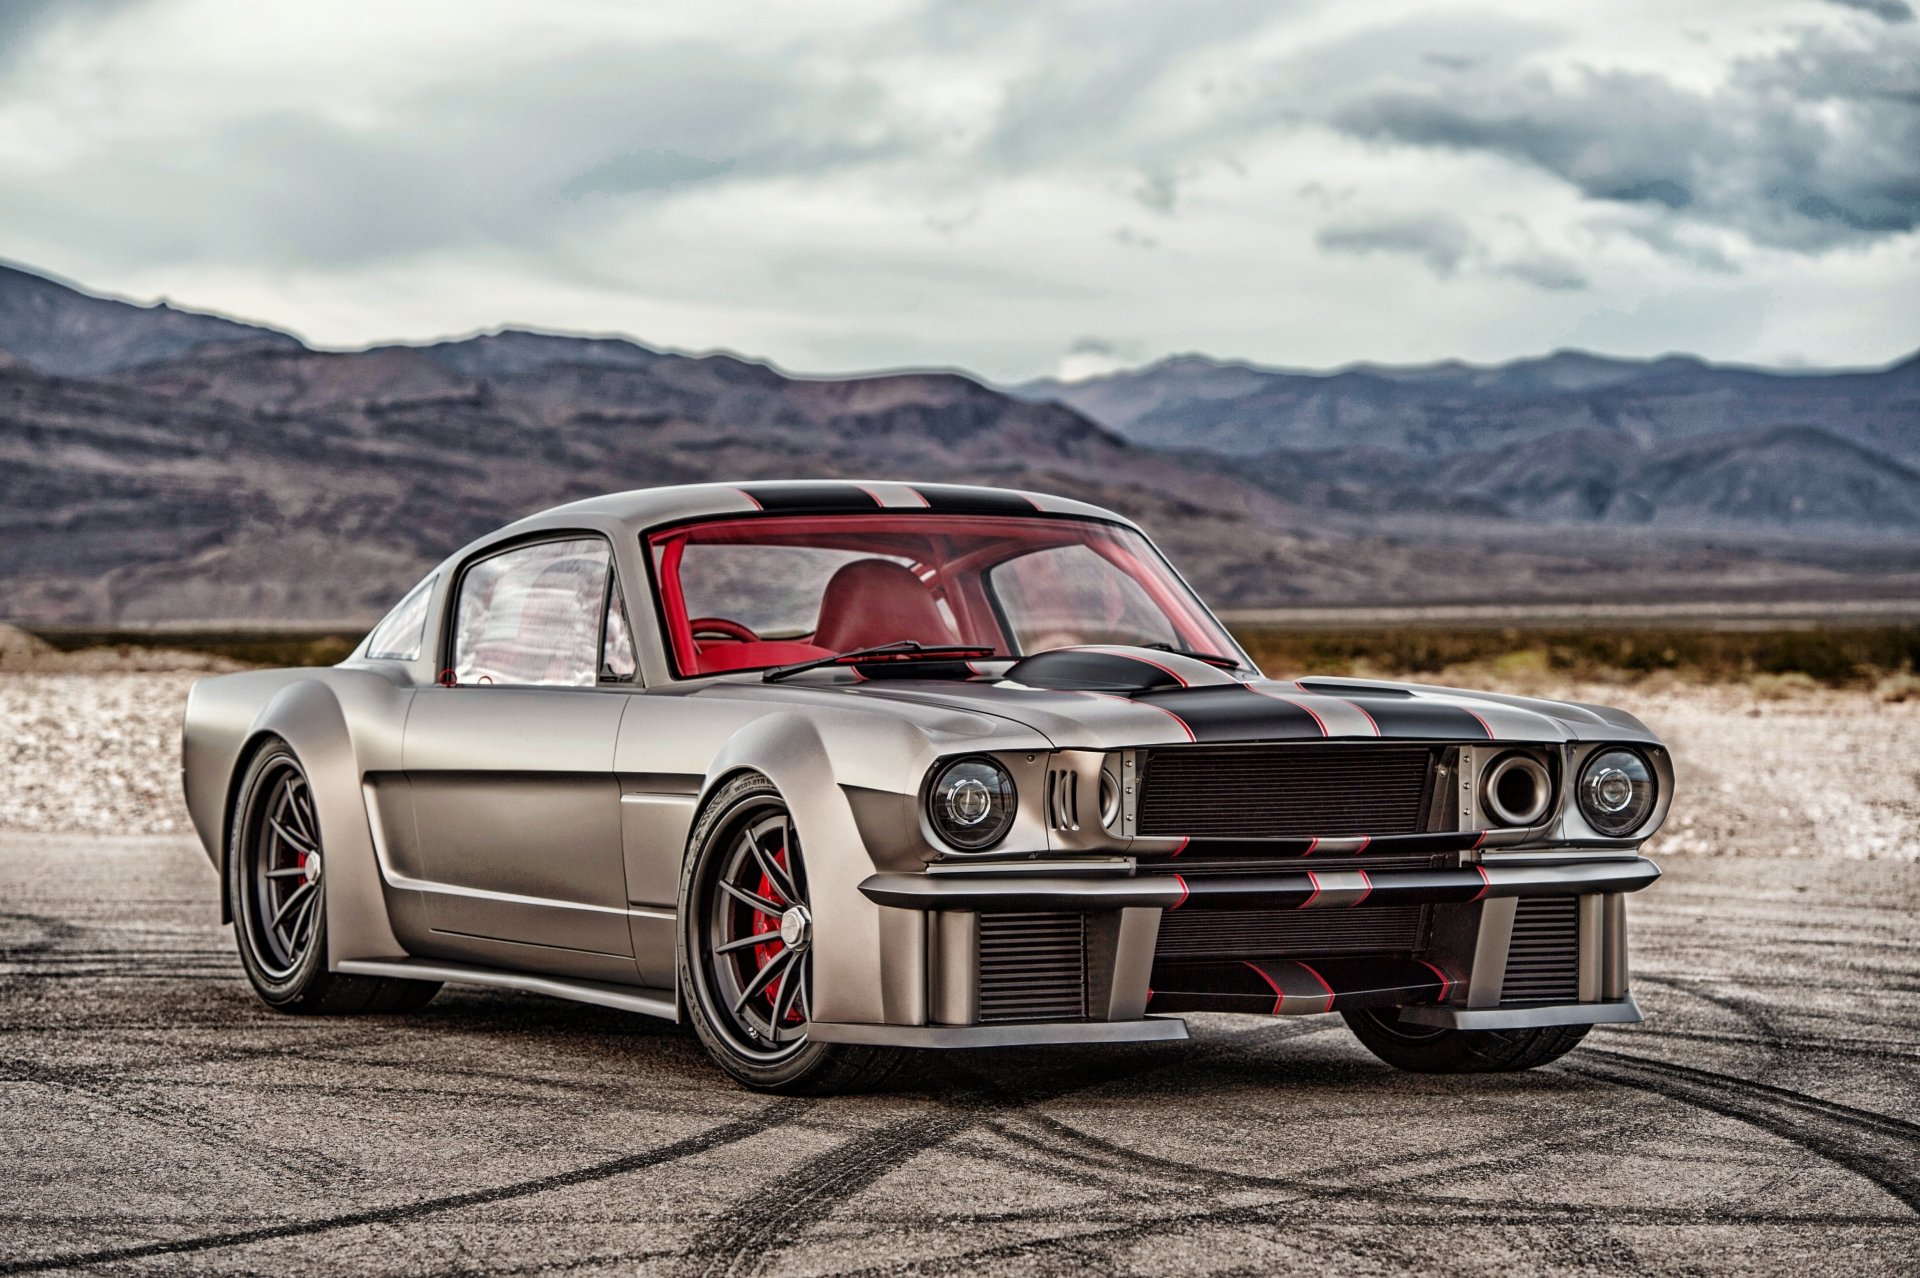 Ford Mustang 4k Ultra HD Wallpaper | Background Image ...